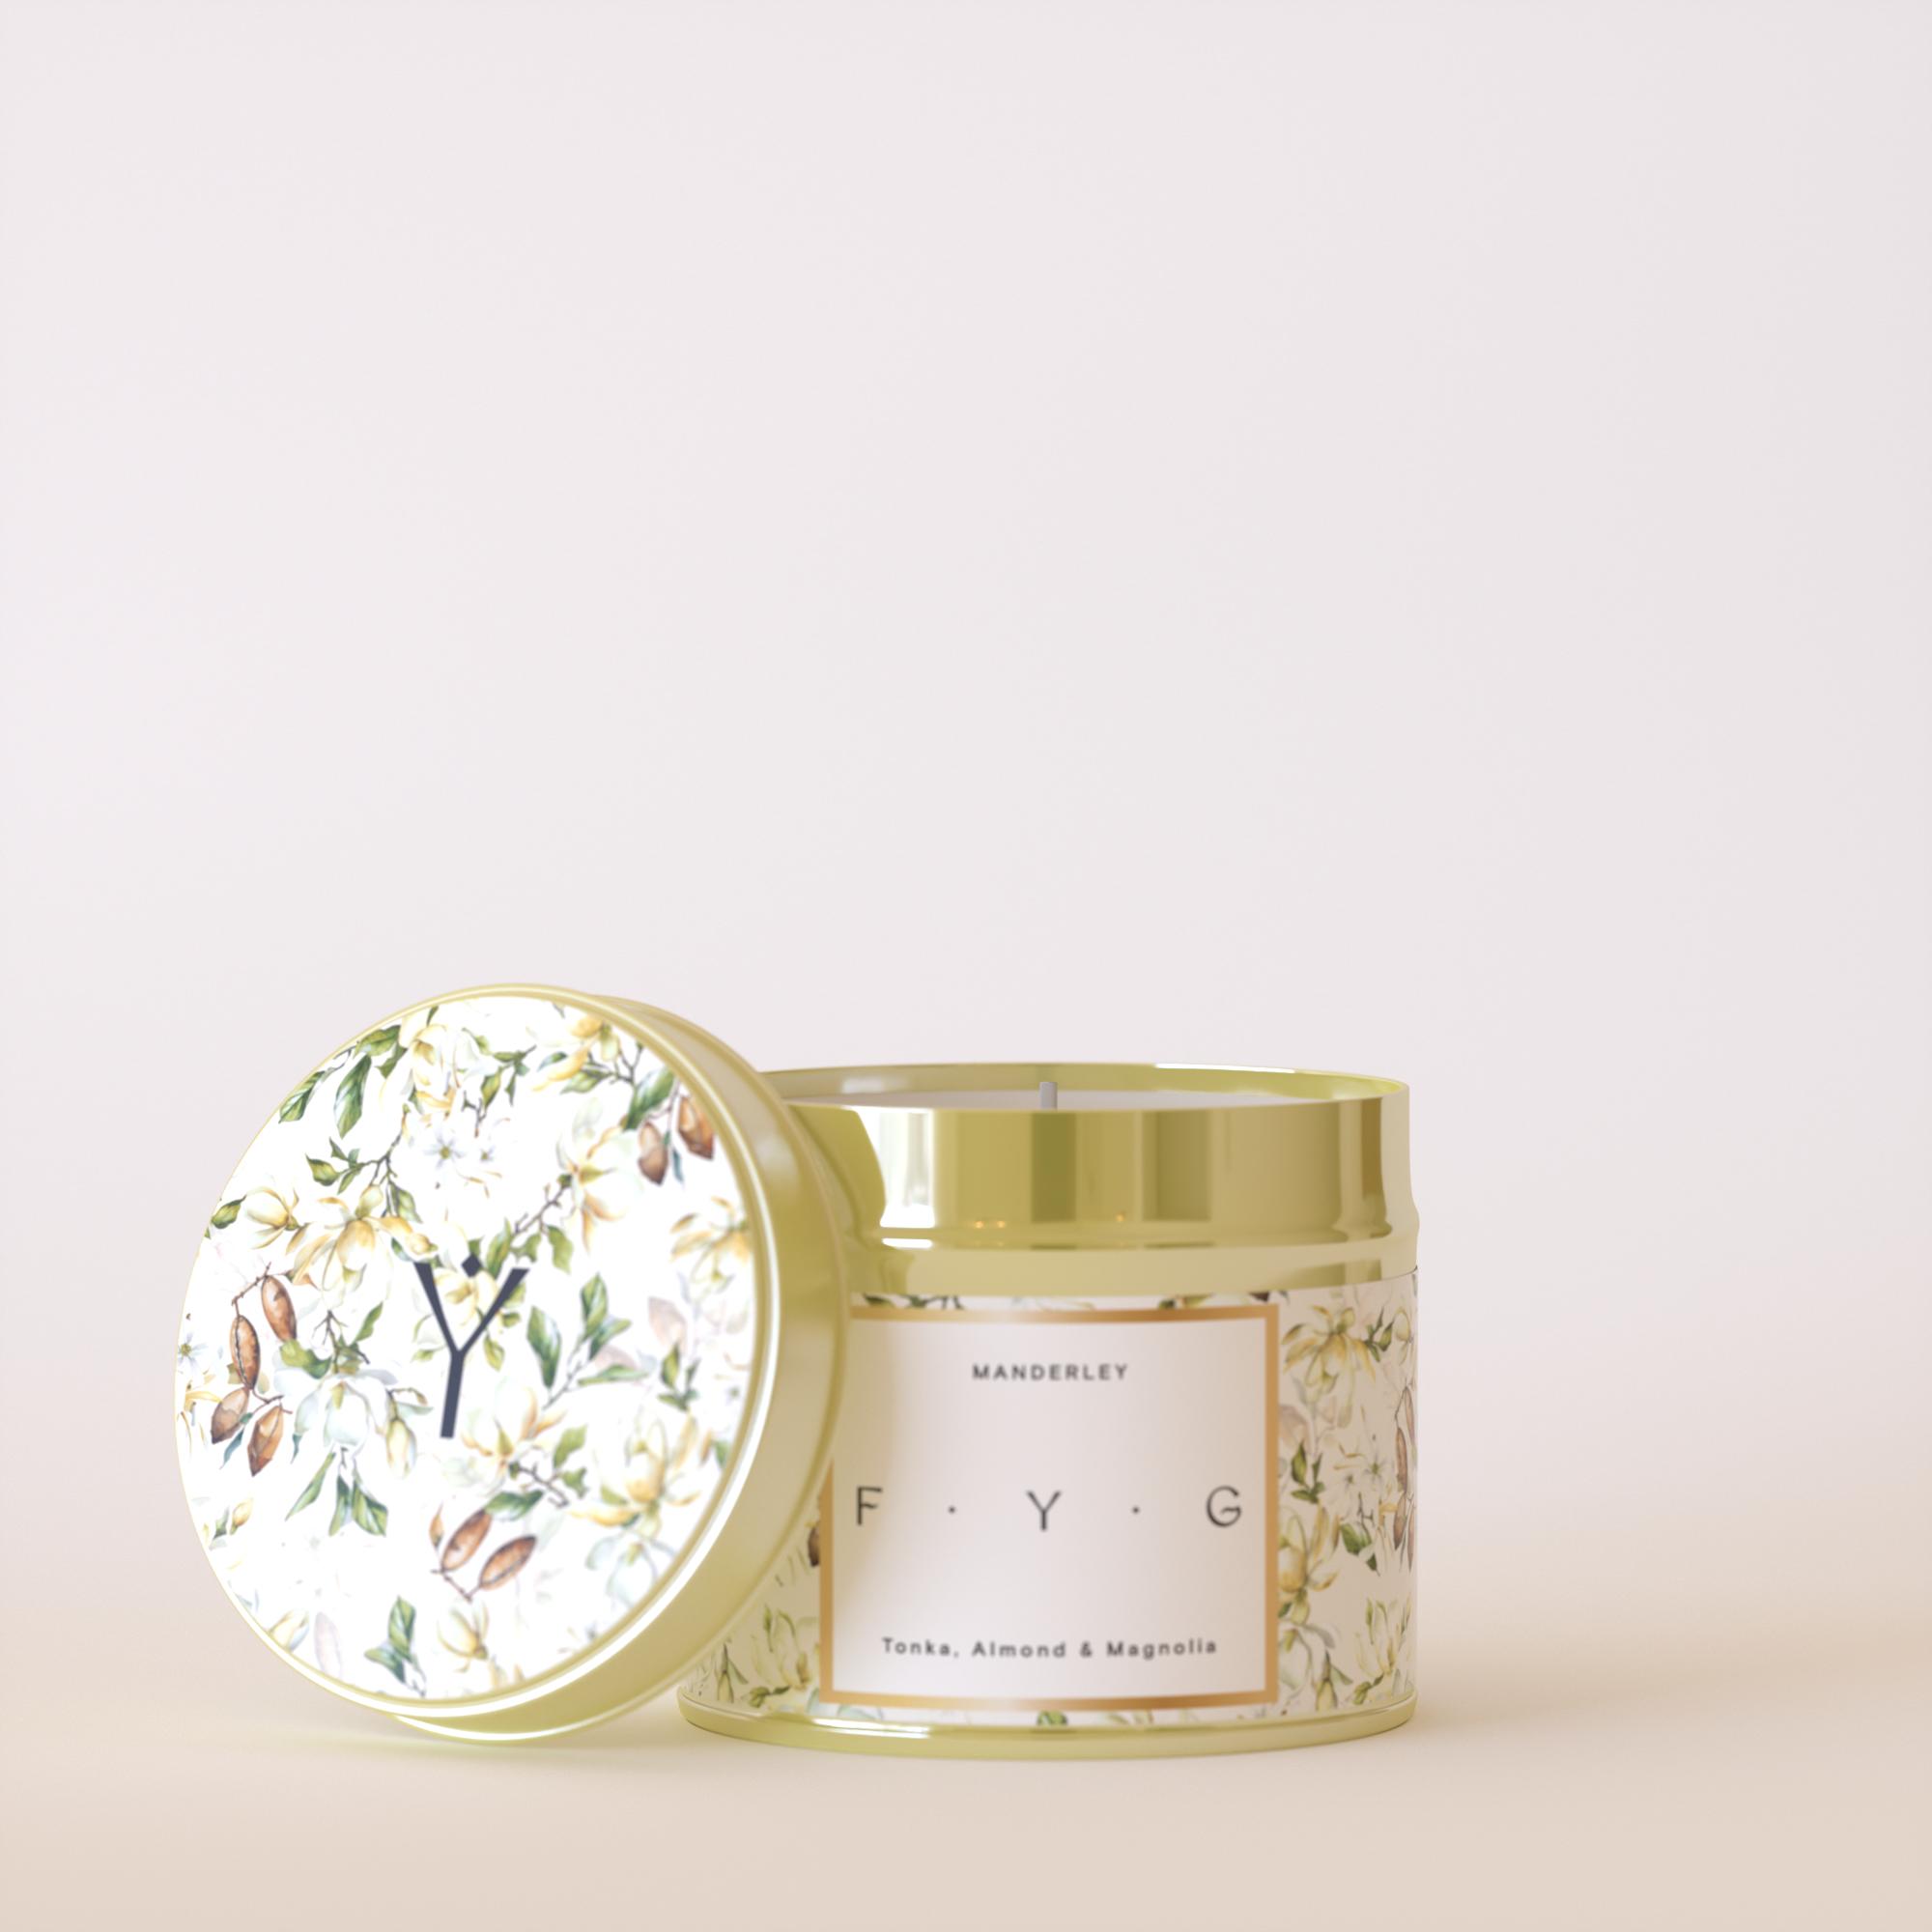 Find Your Glow Menderley Tin Candle